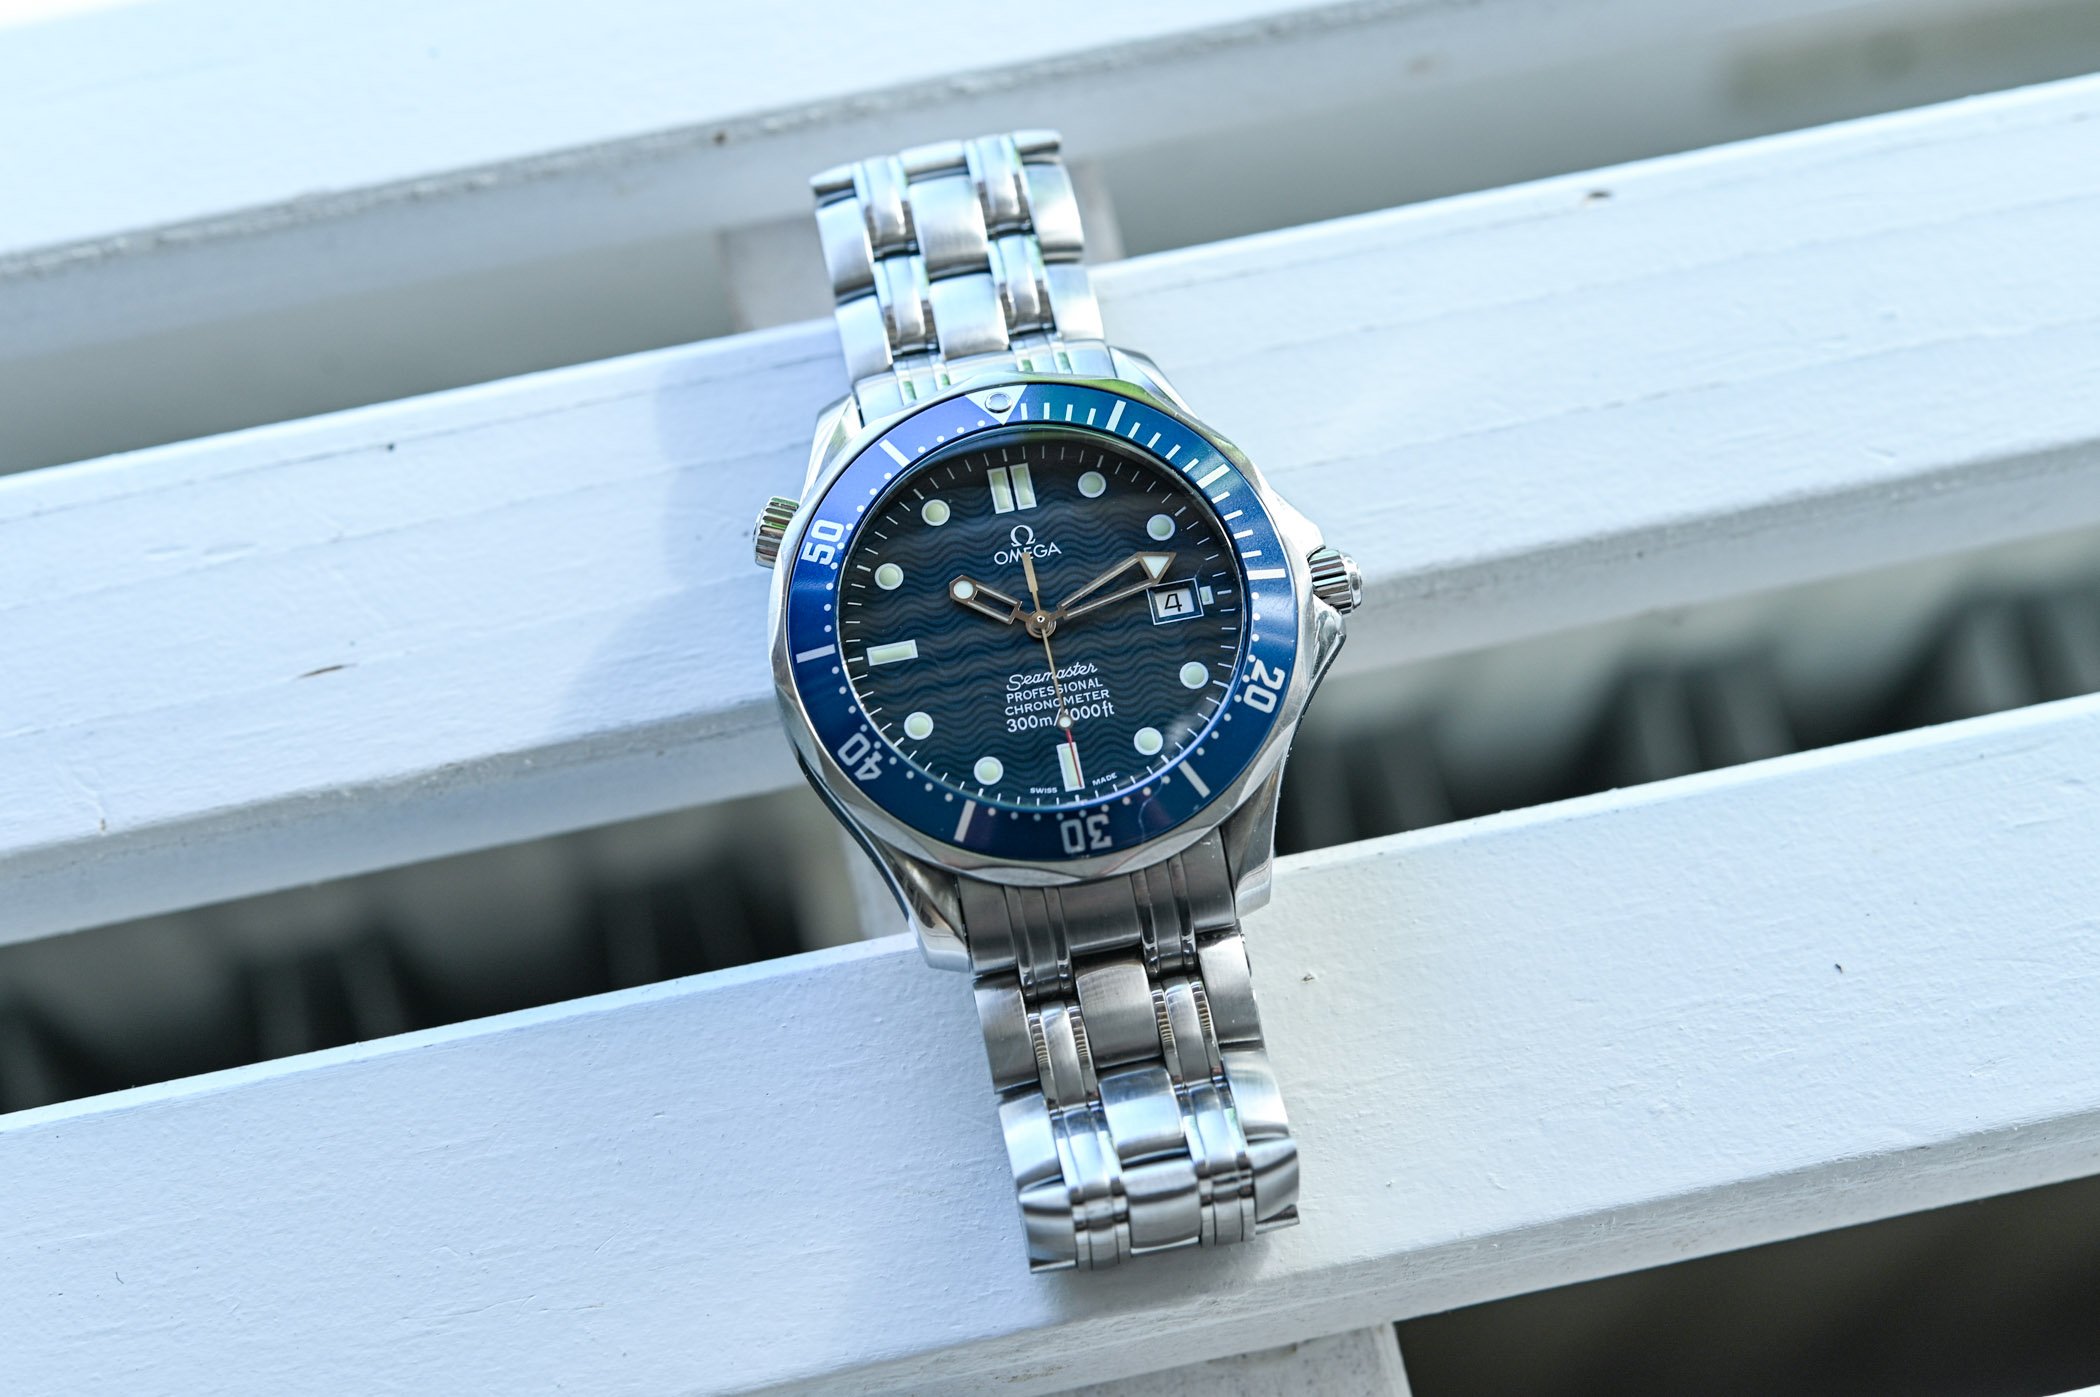 Collector's Corner - The Omega Seamaster Professional Diver SMP 300